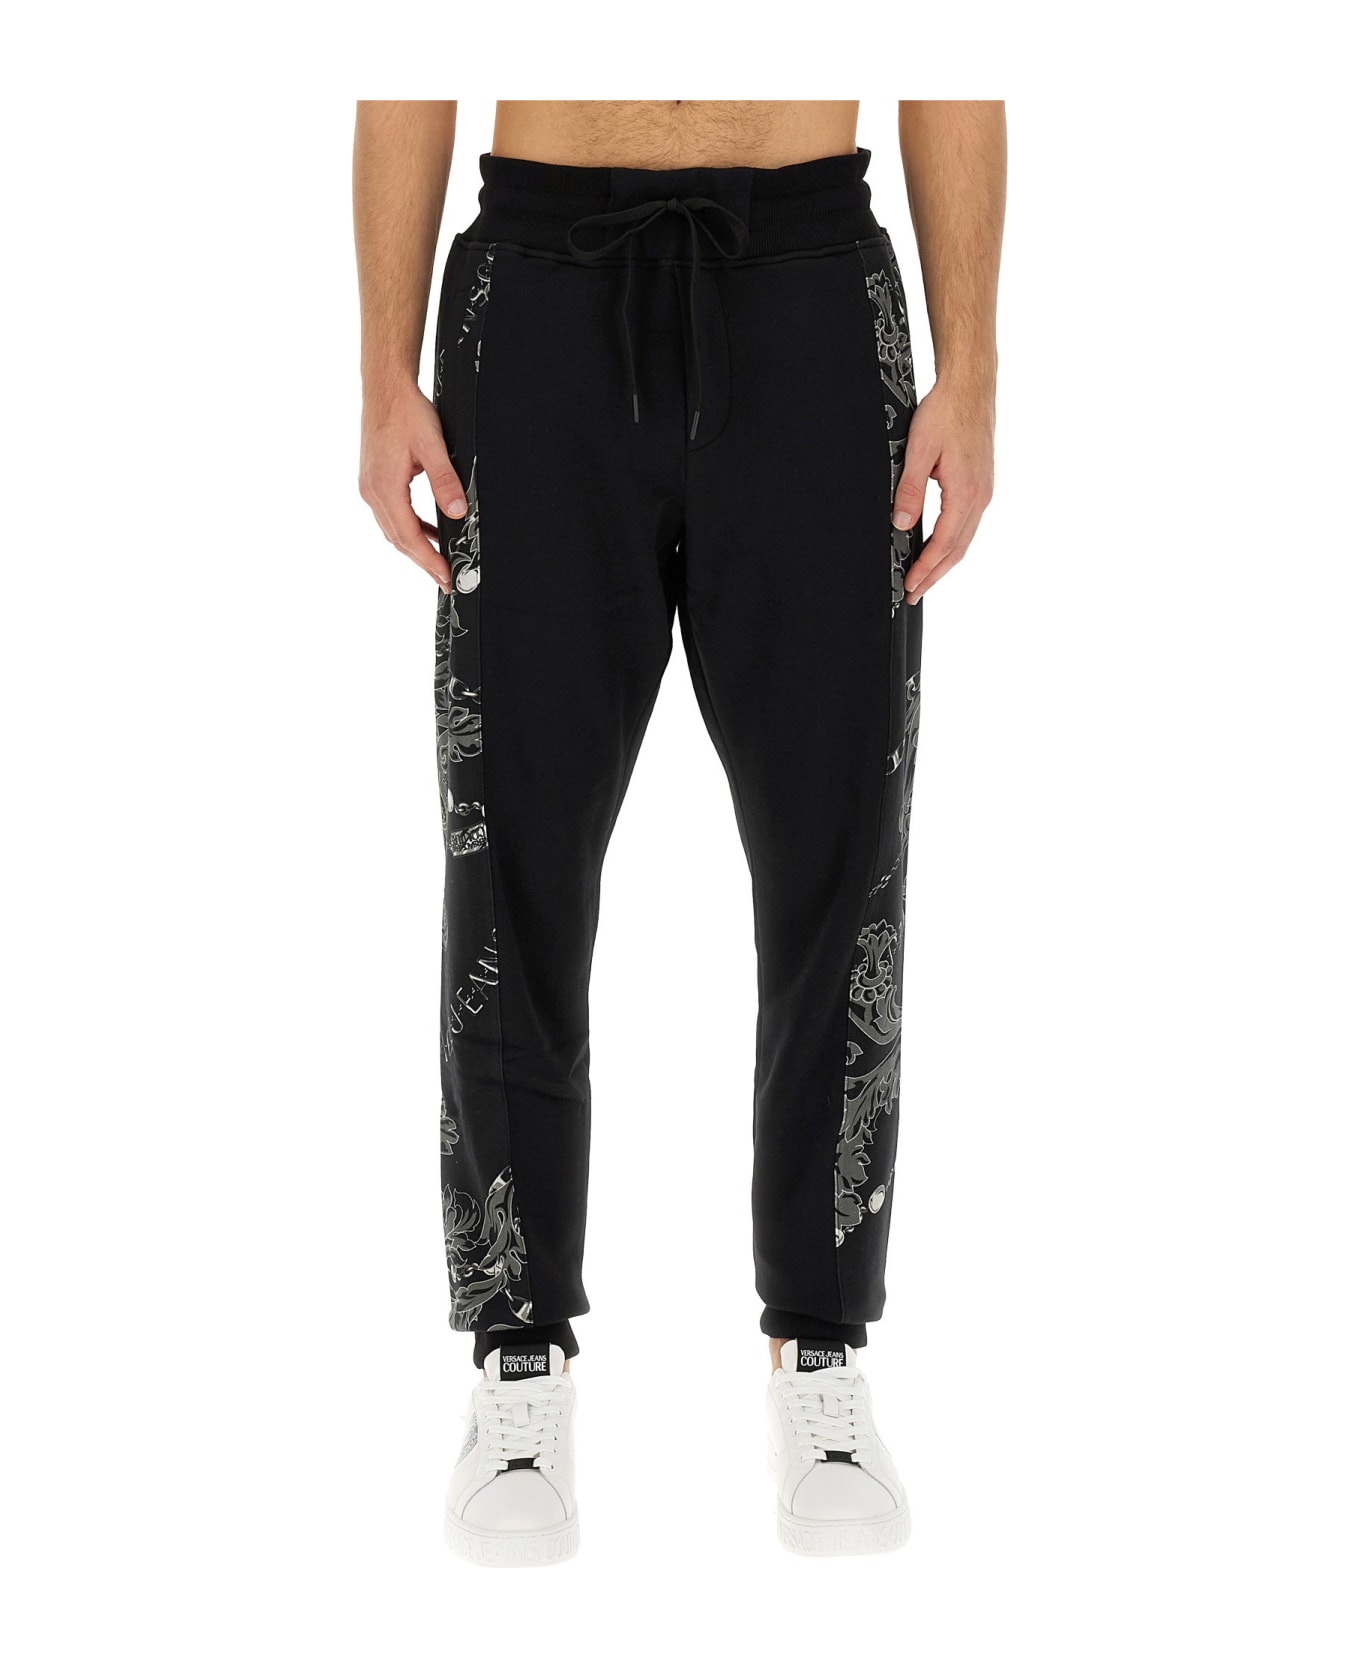 Versace Jeans Couture Chain Couture Jogging Pants - NERO スウェットパンツ